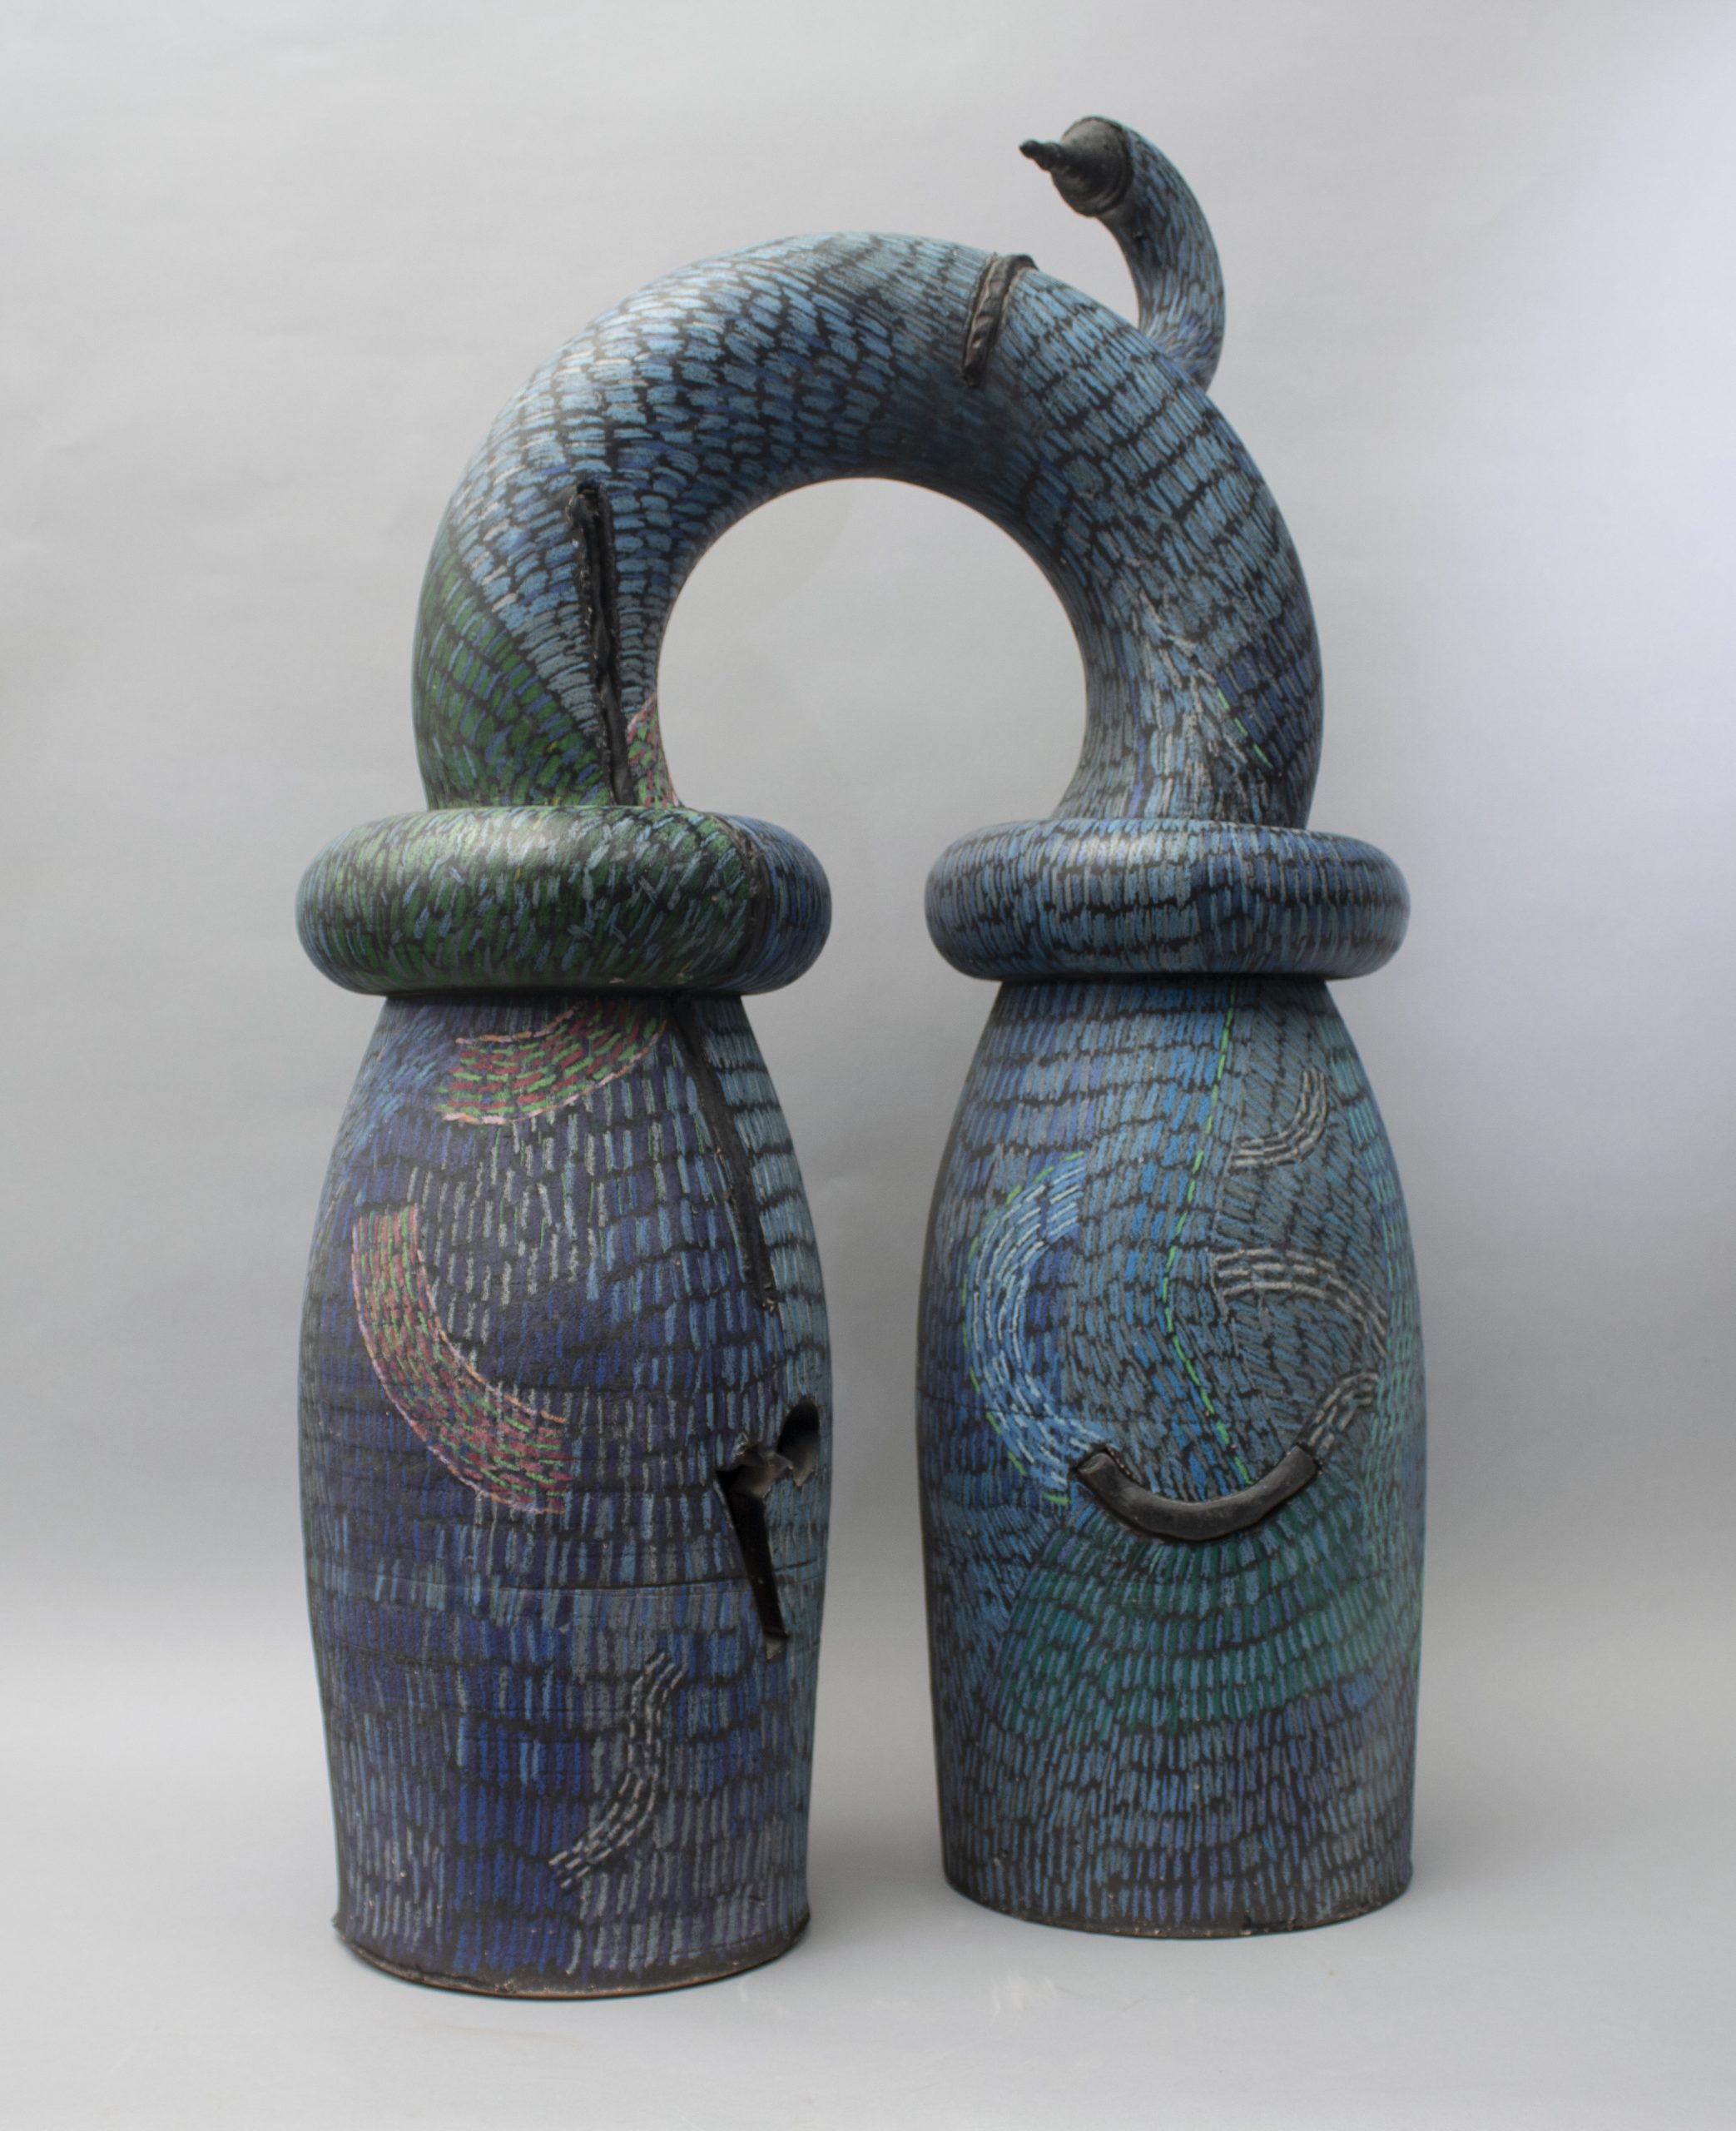 Bill Farrell, He Says, He Says, 1981, Enamel paint and cre pas on stoneware, 31 x 18 x 10 inches, Dubuque Museum of Art, Gift of the artist